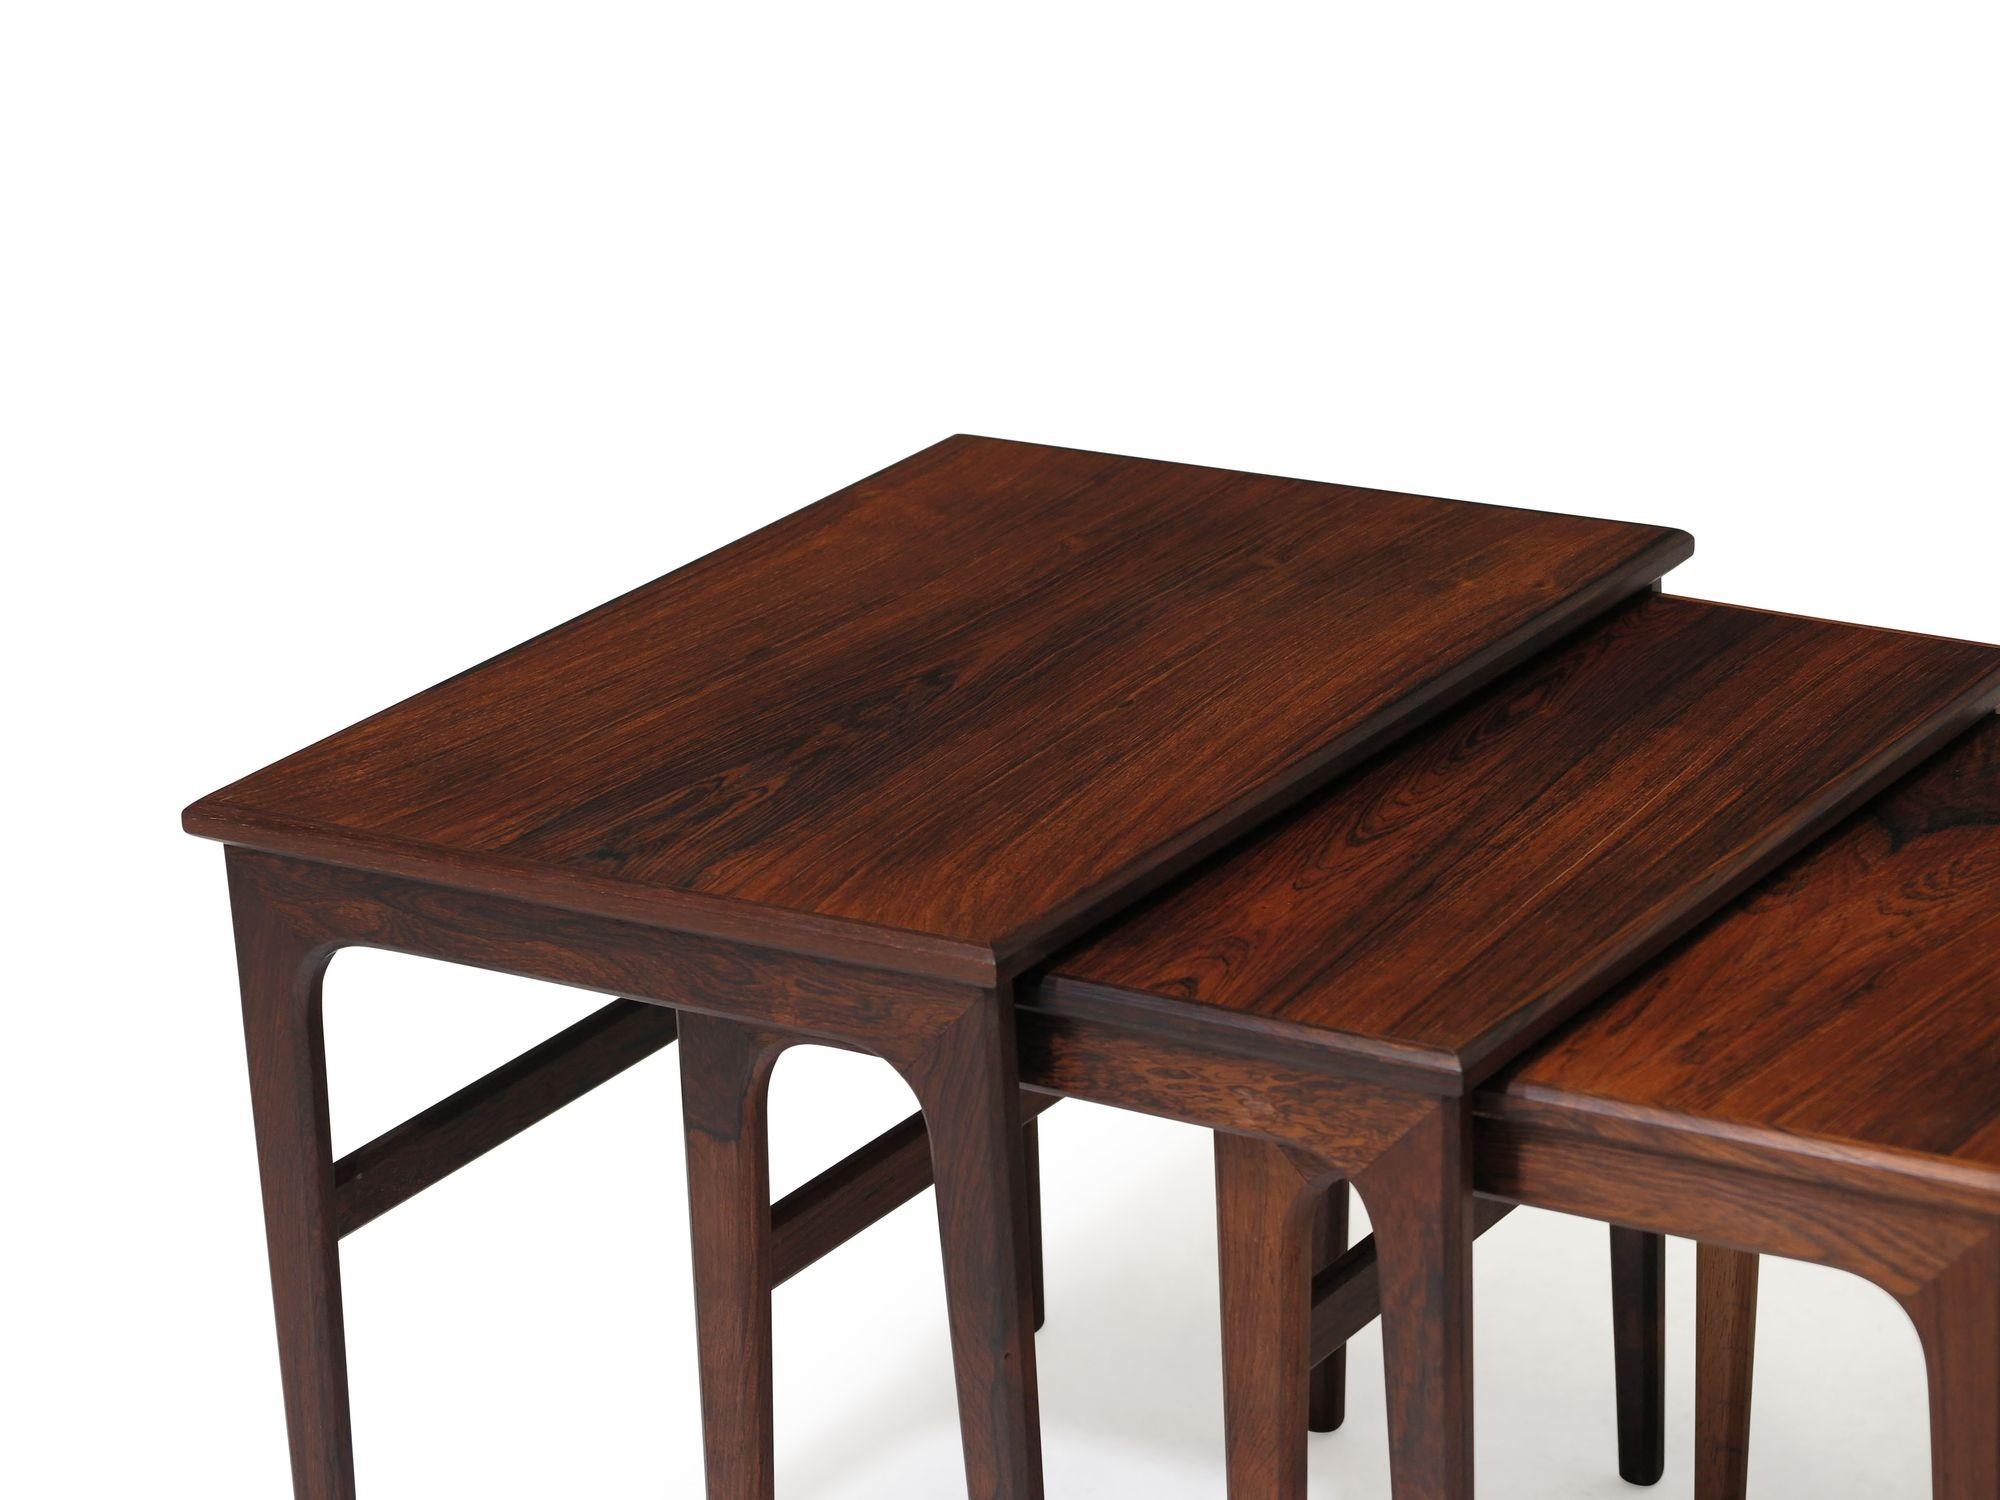 Set of three rosewood nesting tables with tapered legs and minimal design. Flexible in any configuration to suit your needs. 
Measurements 
W 22.75 x D 15.88 x H 18.12
Medium Table
W 20.3/8 x D 14.75 x 17.5/8
Small Table
W 18 x D 13.75 x H